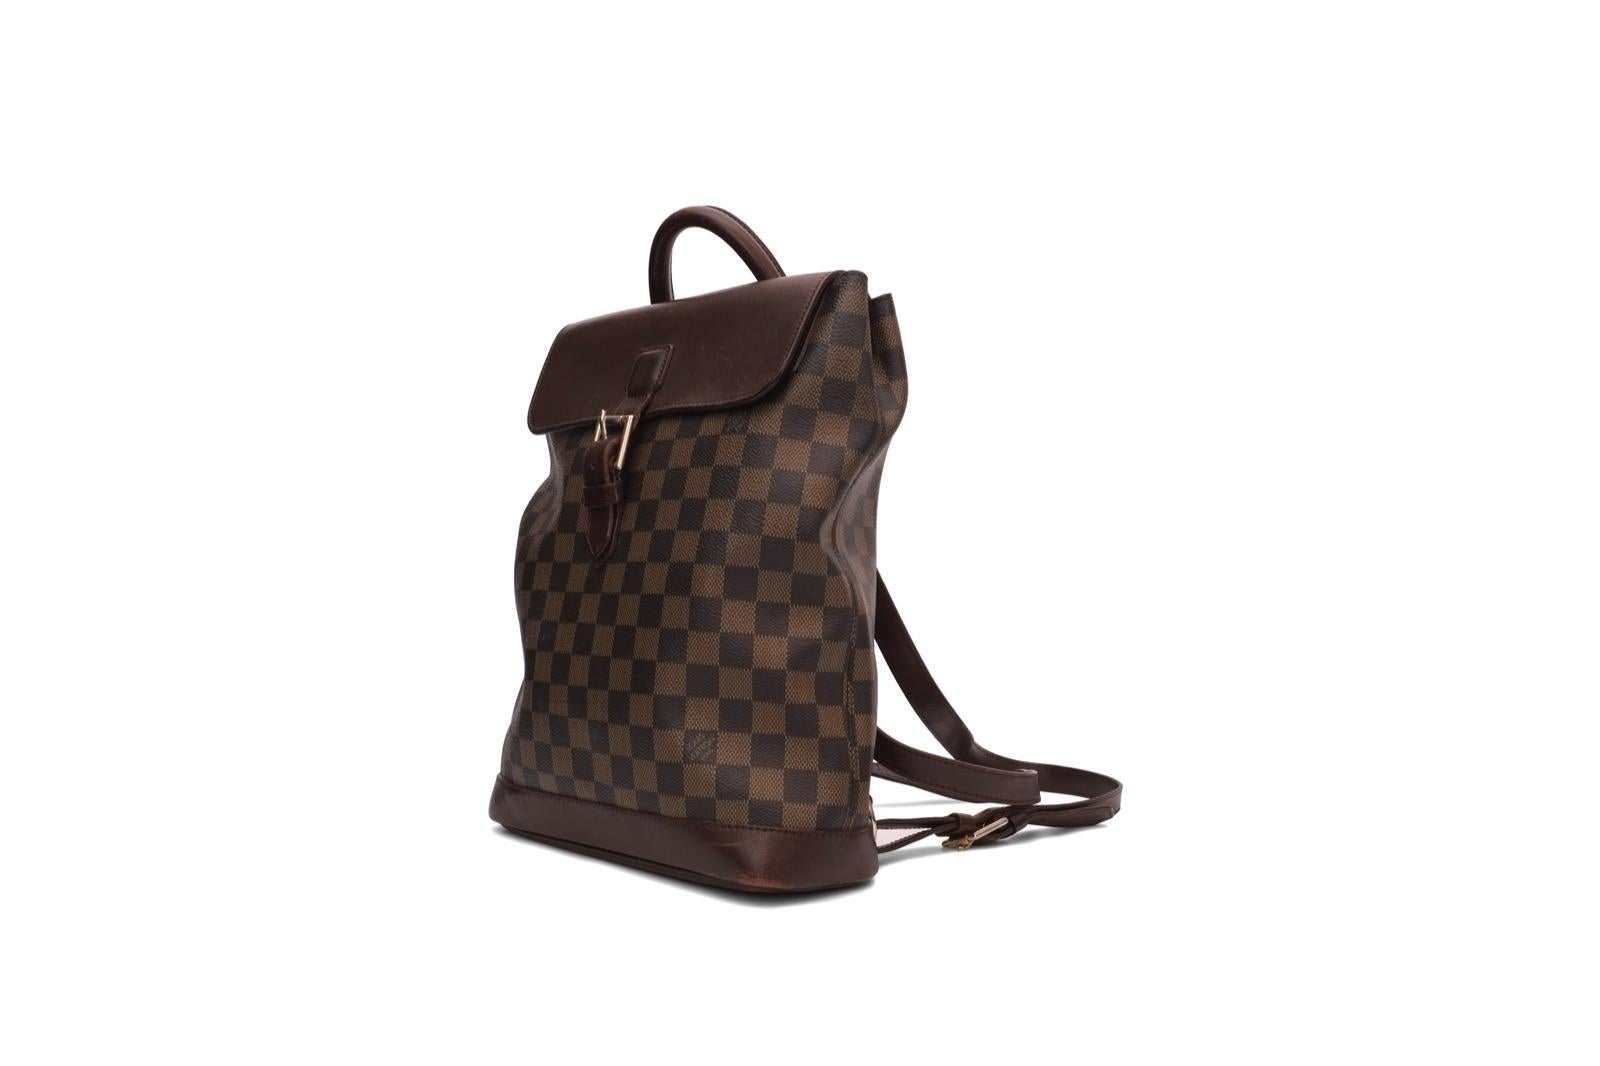 LOUIS VUITTON VINTAGE
Soho Damier Ebene backpack
Brown leather Soho Damier Ebene backpack from Louis Vuitton Vintage featuring a top handle, a foldover top, a buckle fastening, adjustable shoulder straps, a main internal compartment and an internal